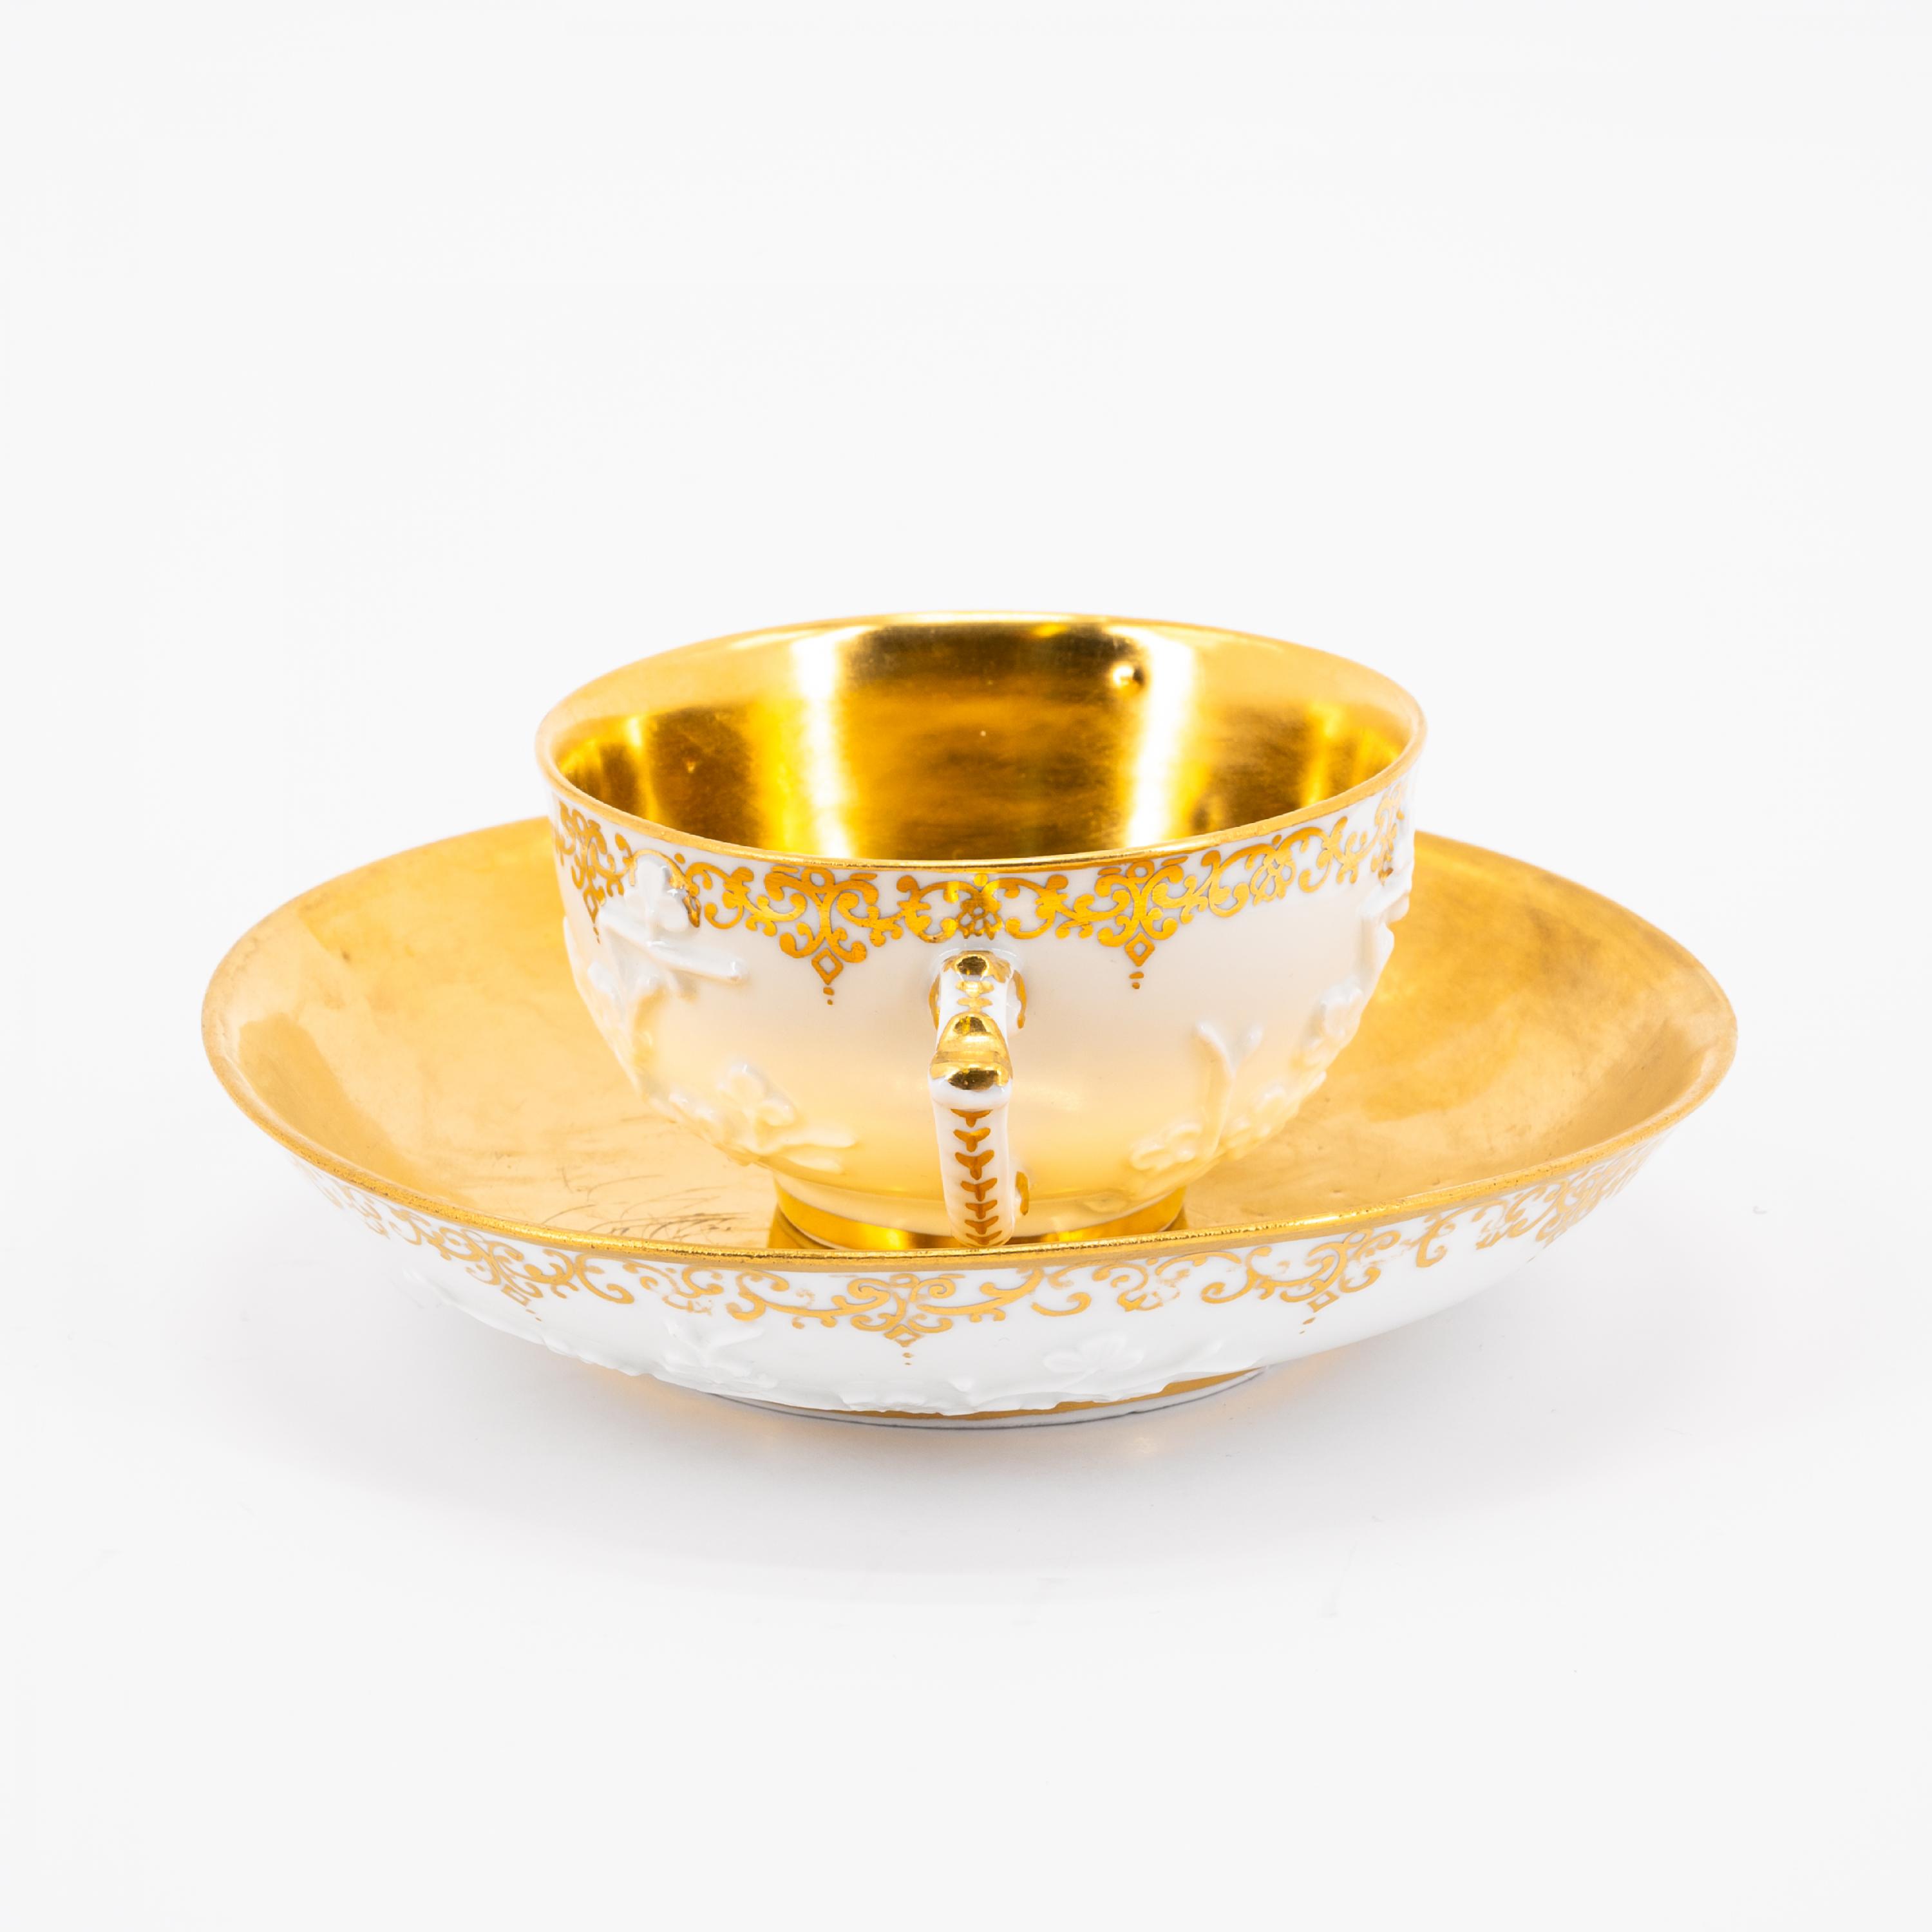 PORCELAIN ENSEMBLE OF SLOP BOWL, TWO CUPS AND SAUCERS WITH GILDED DECOR - Image 7 of 16